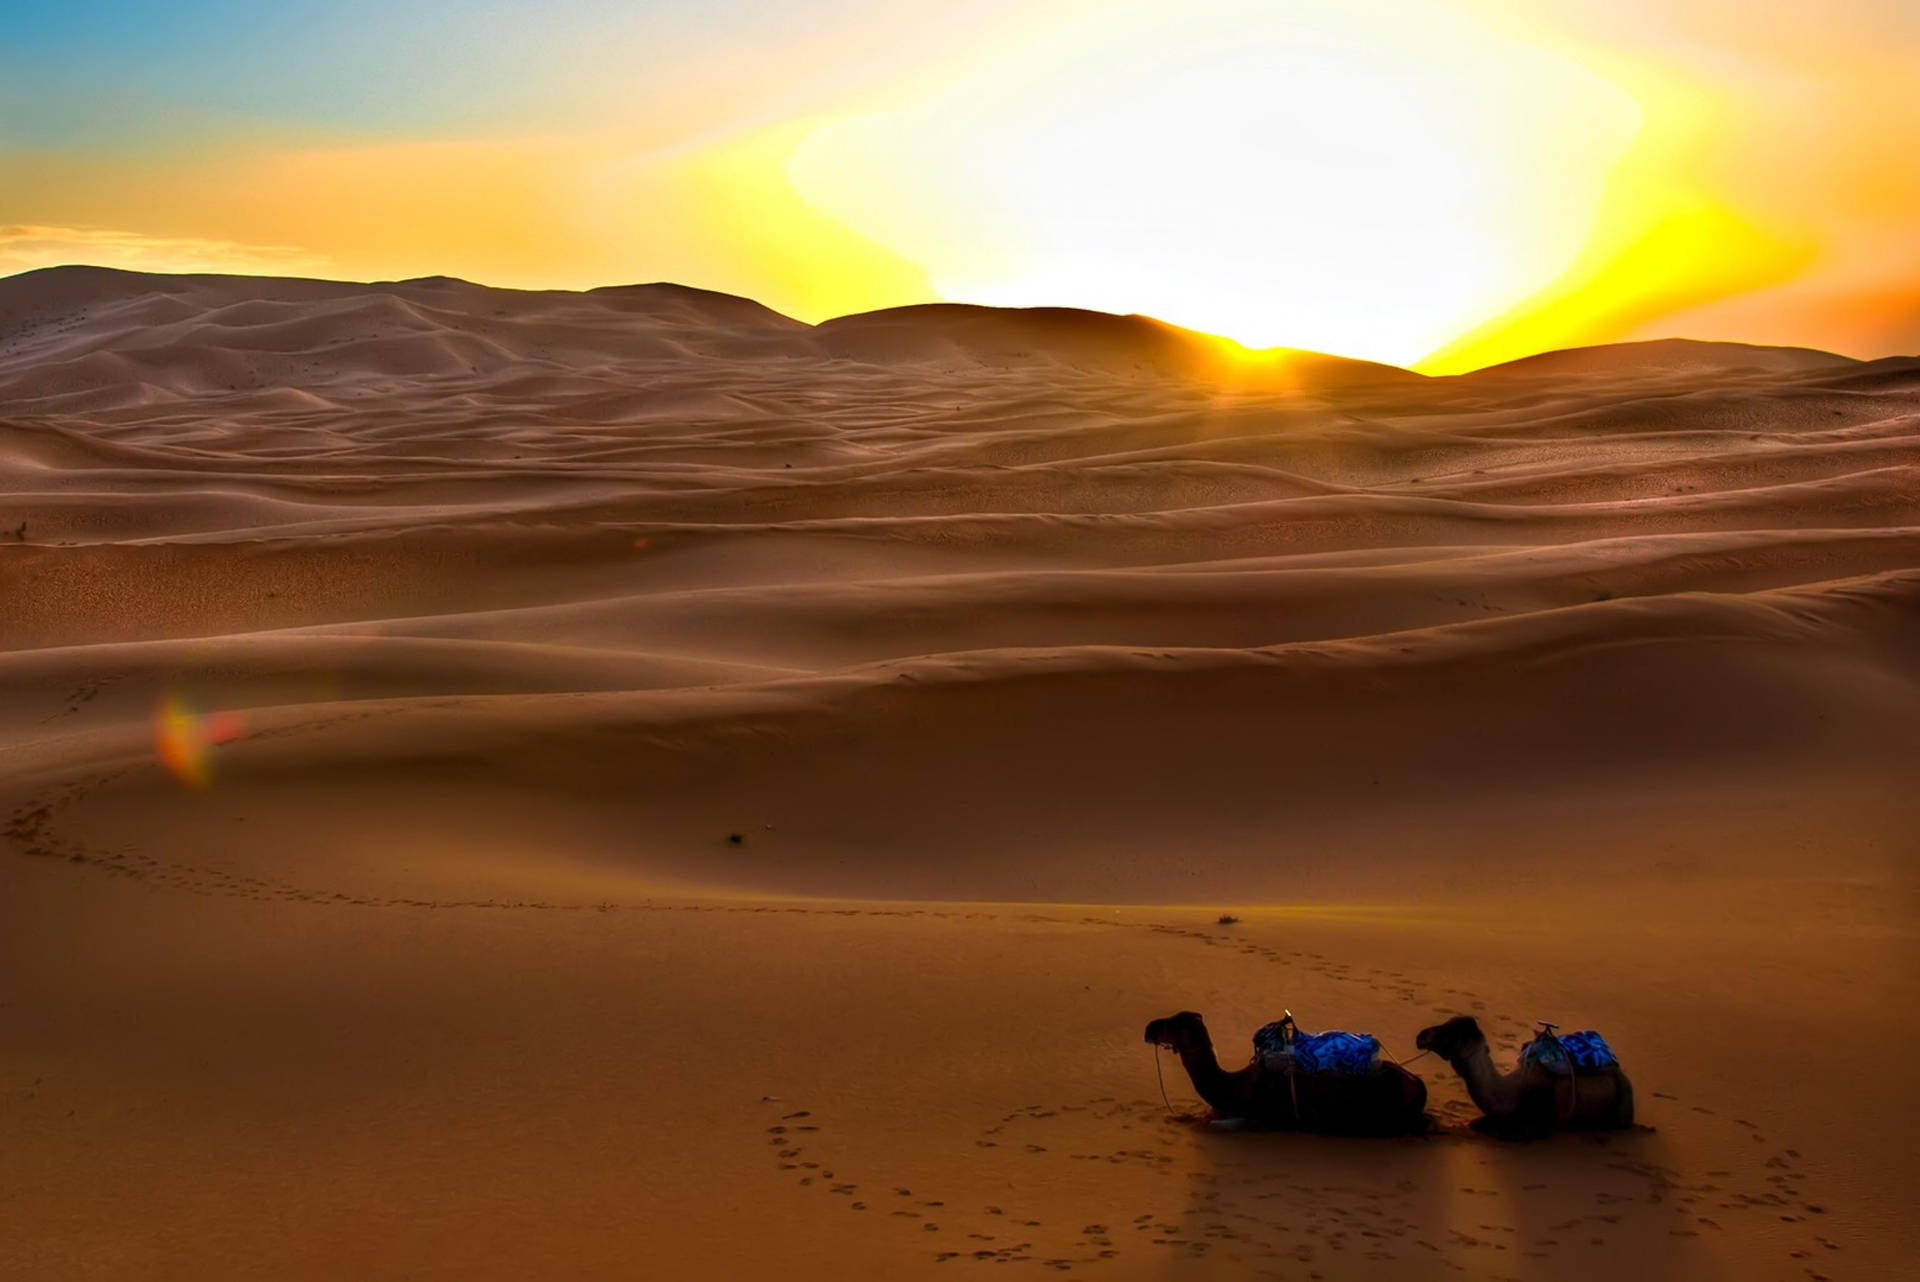 Setting Desert Sun With Camels